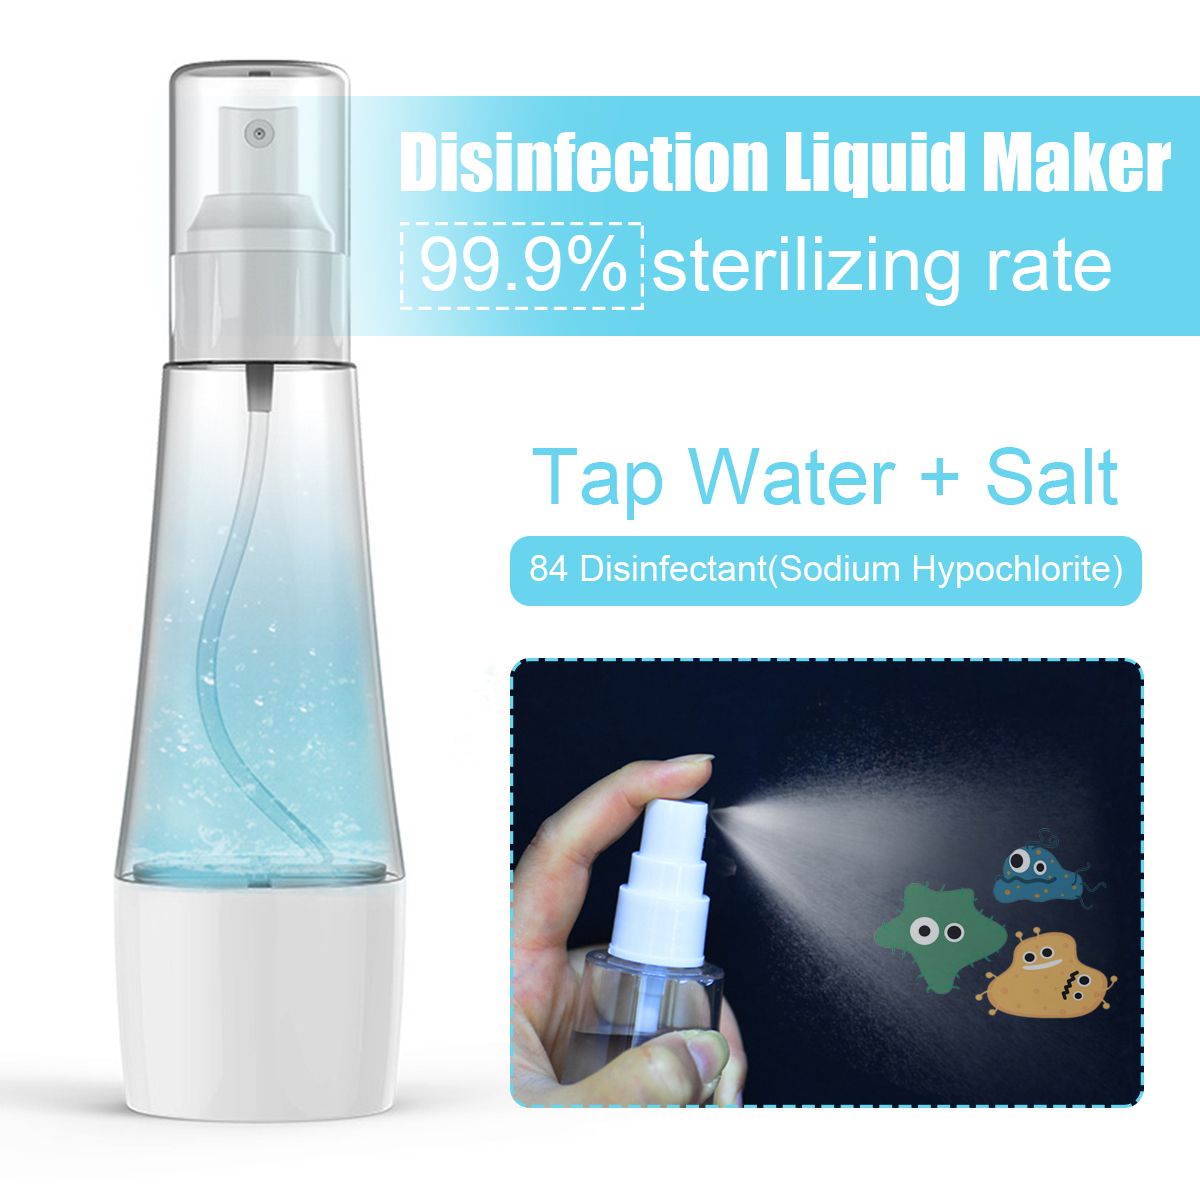 Portable-Sodium-Hypochlorite-Disinfectant-Generator-Disinfection-Water-Maker-1665111